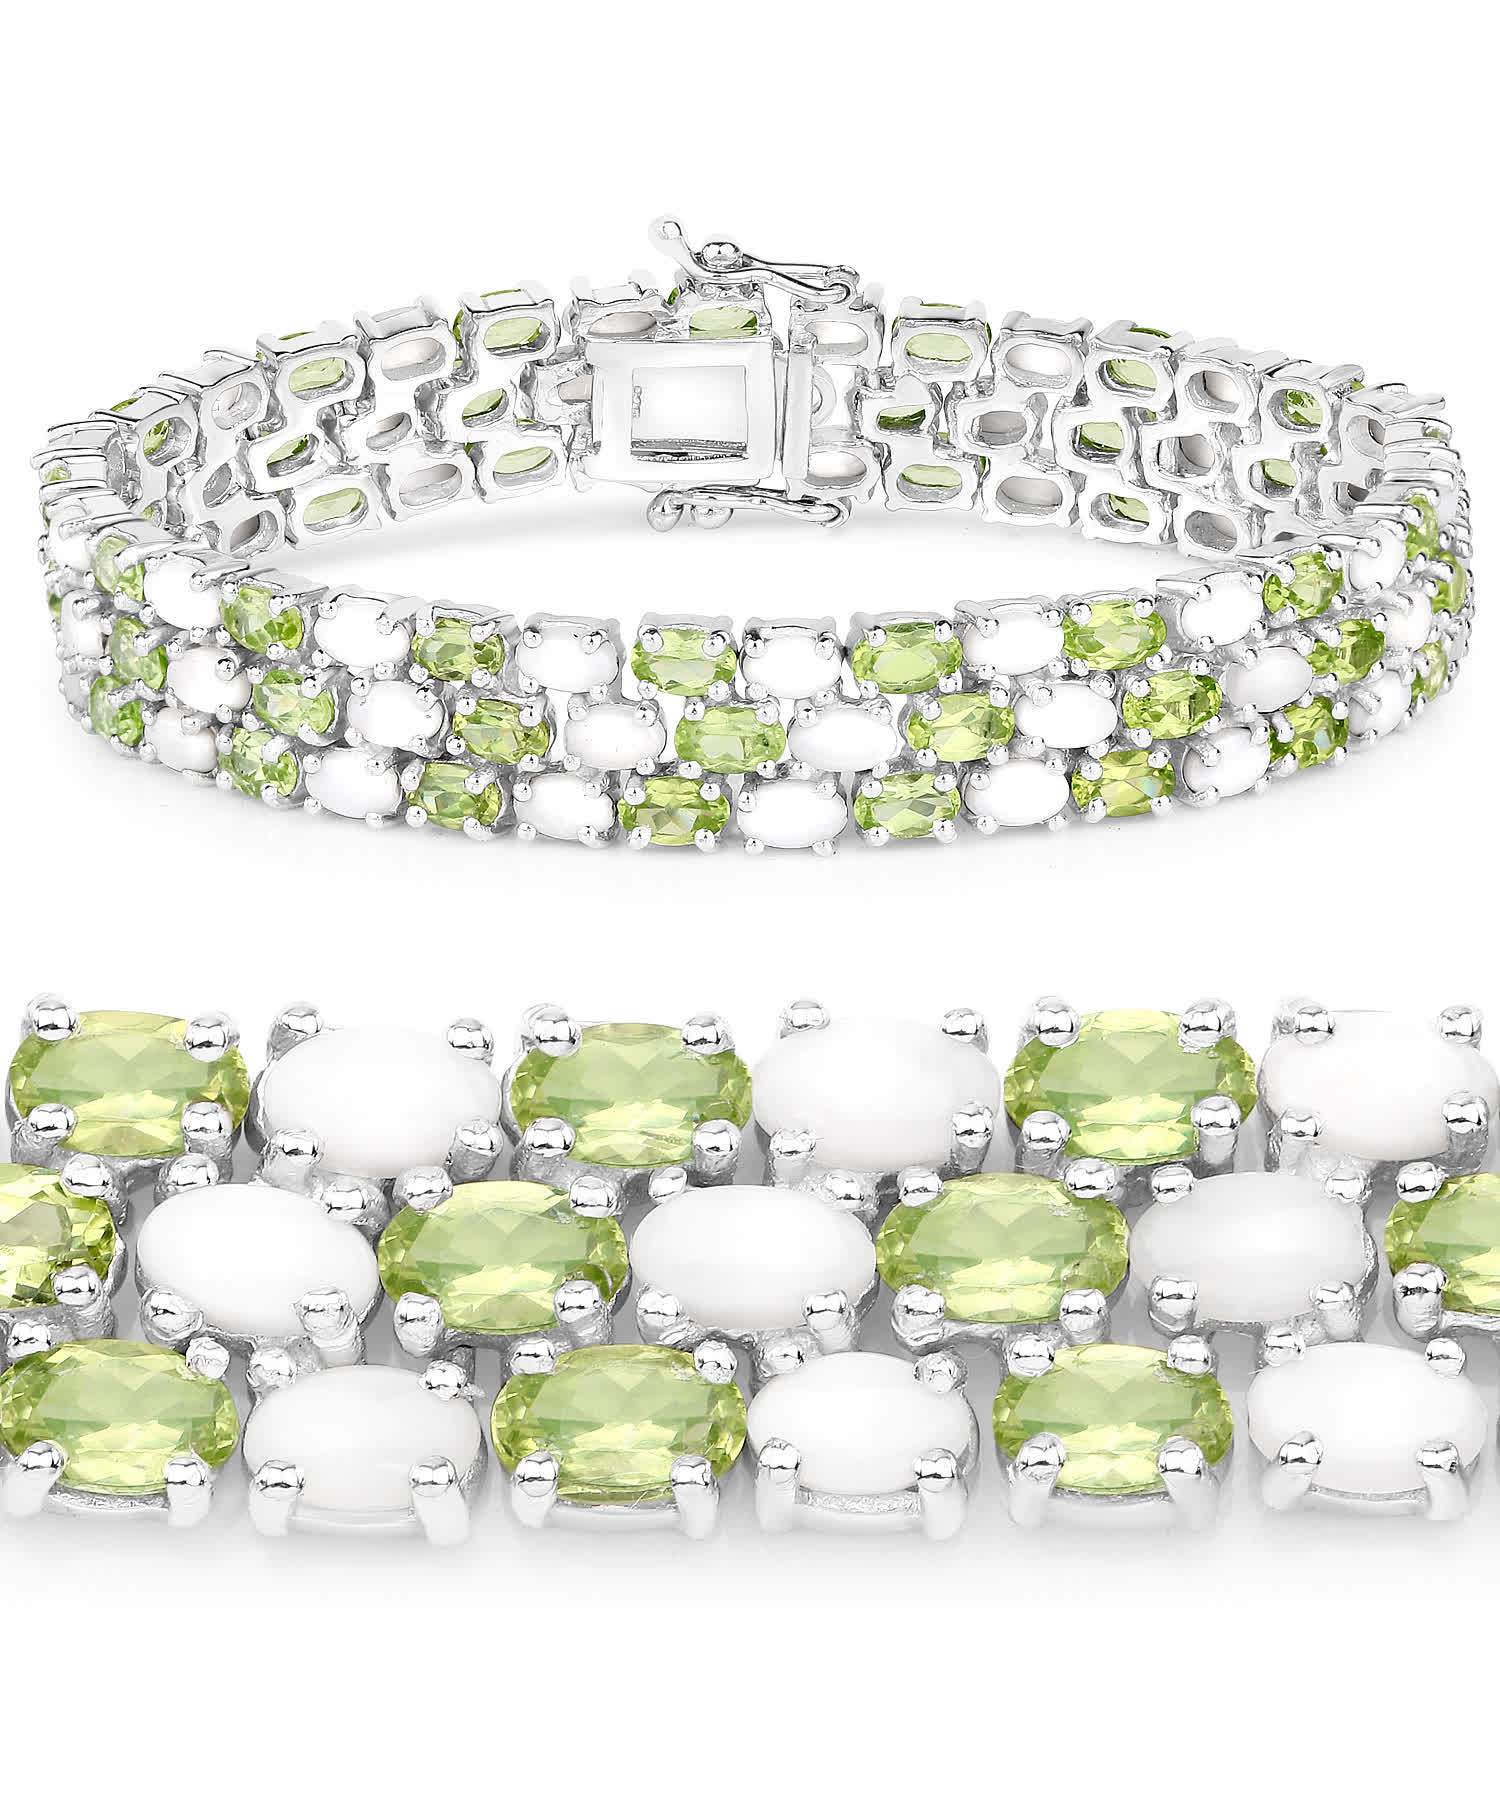 19.73ctw Natural Peridot and Opal Rhodium Plated 925 Sterling Silver Link Bracelet View 2